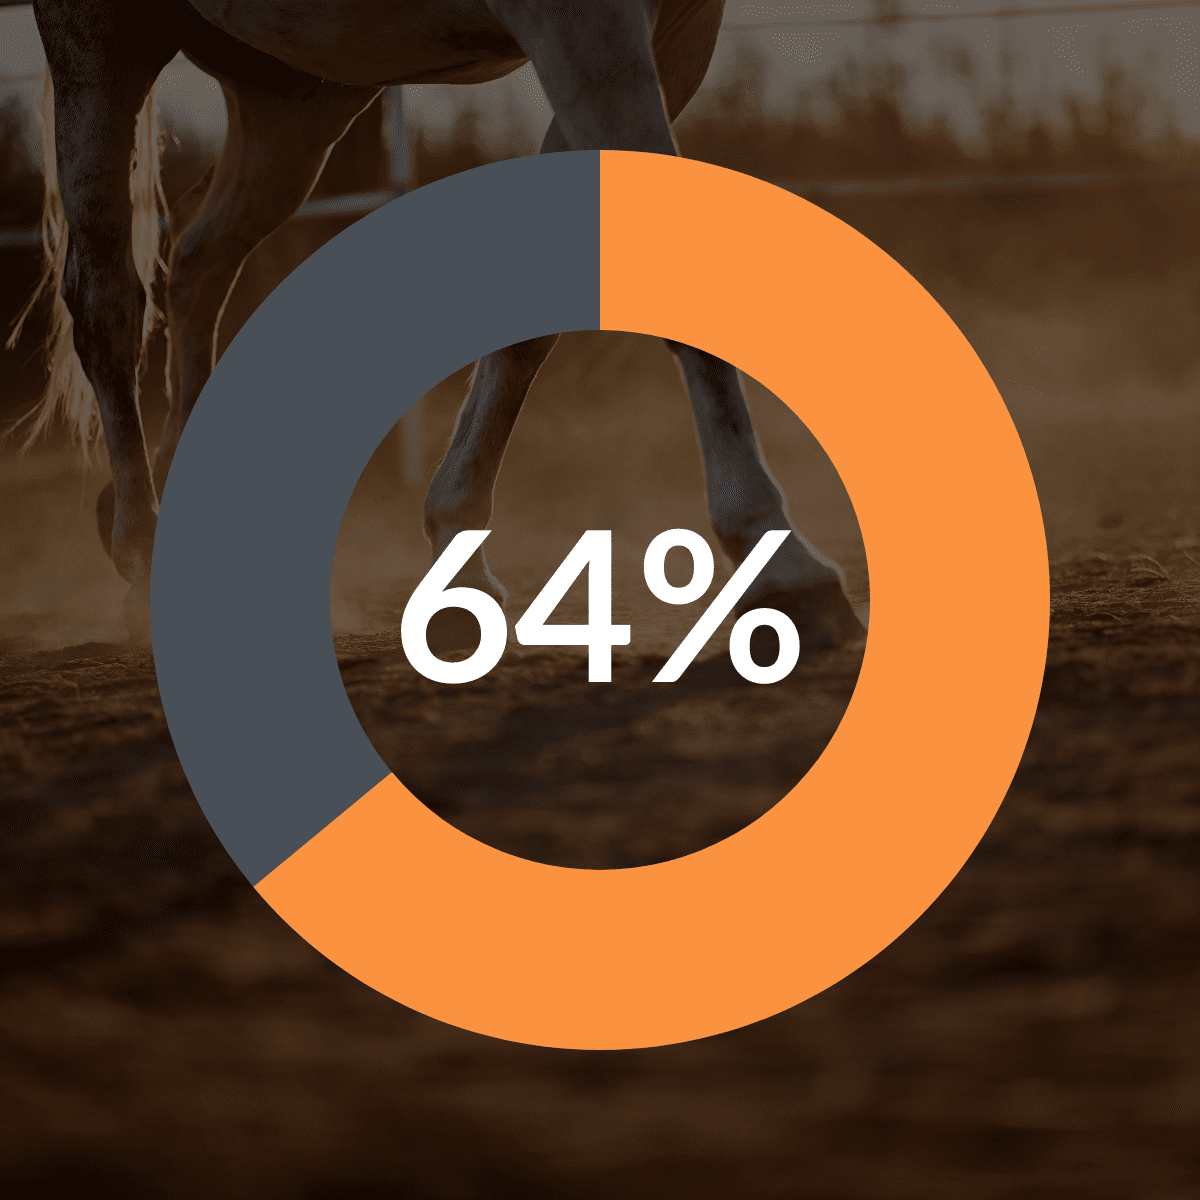 A pie chart showing 64% over a faded background of a horse's legs